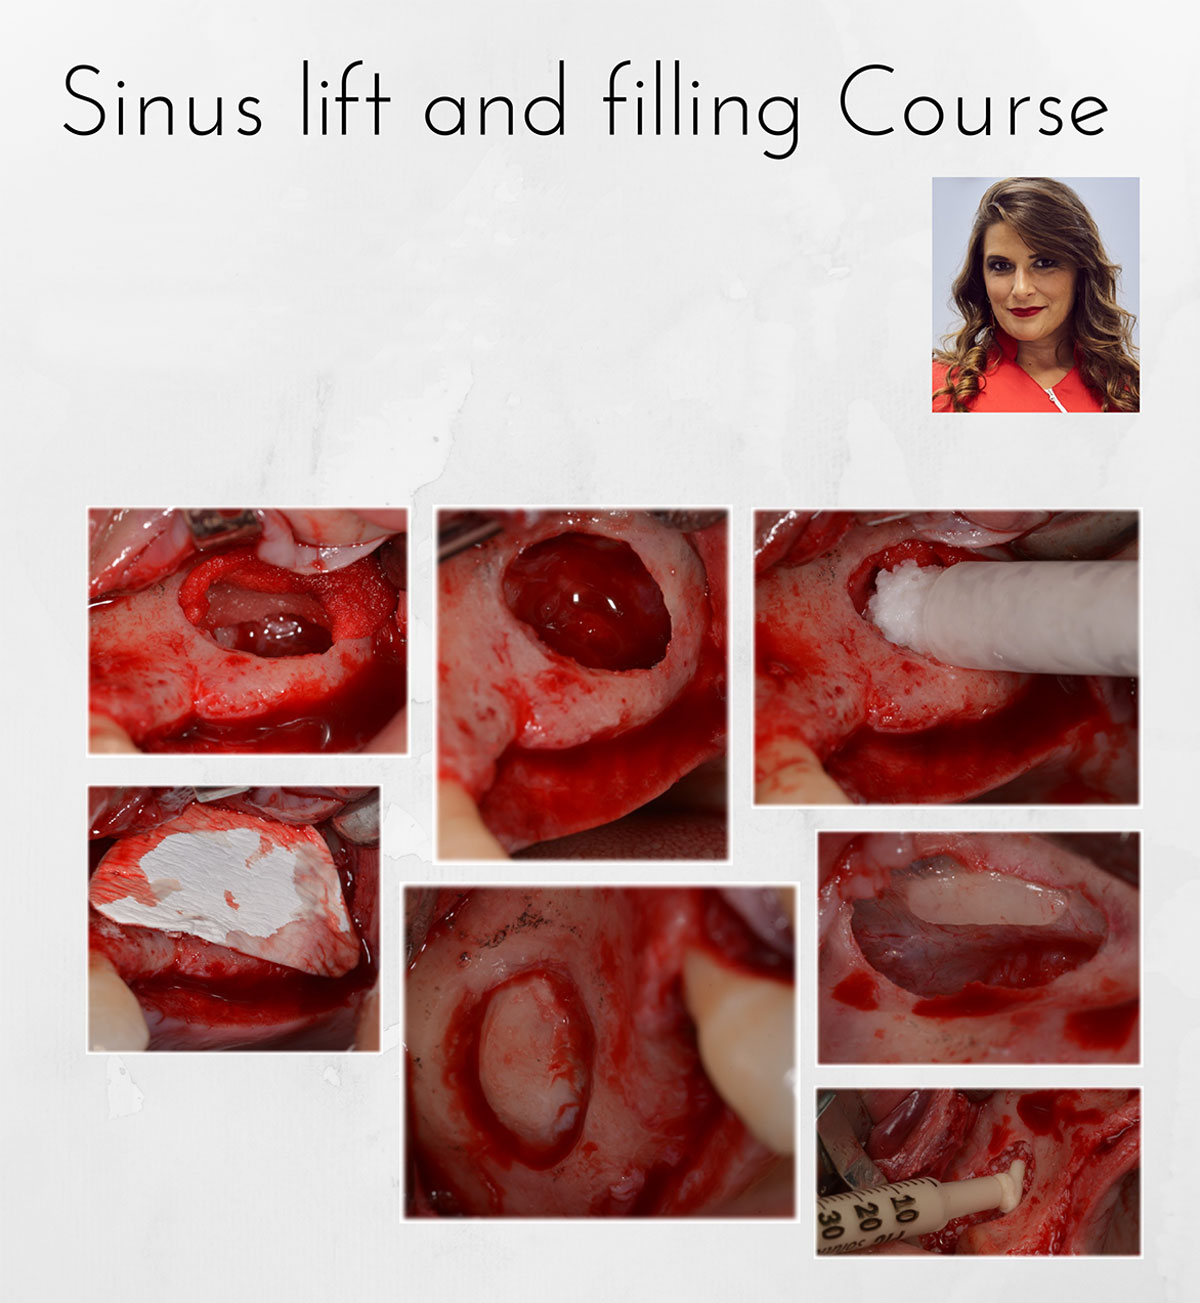 Sinus lift and filling Course